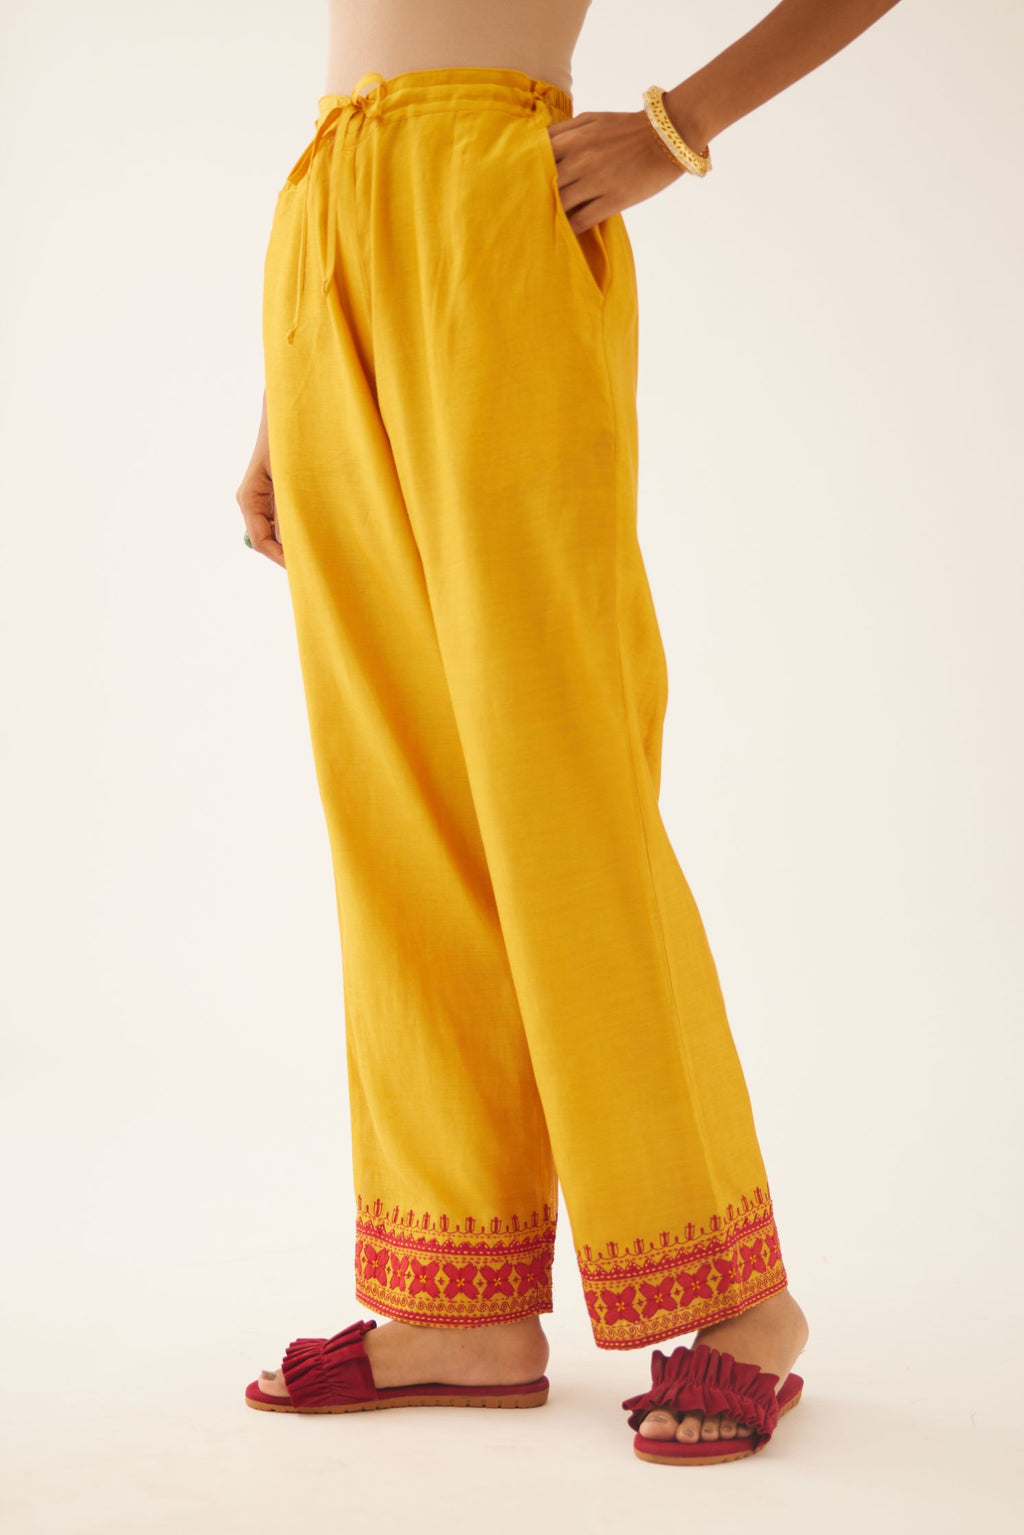 Golden Yellow silk chanderi straight pants detailed with contrast red applique & kantha embroidery at hem.